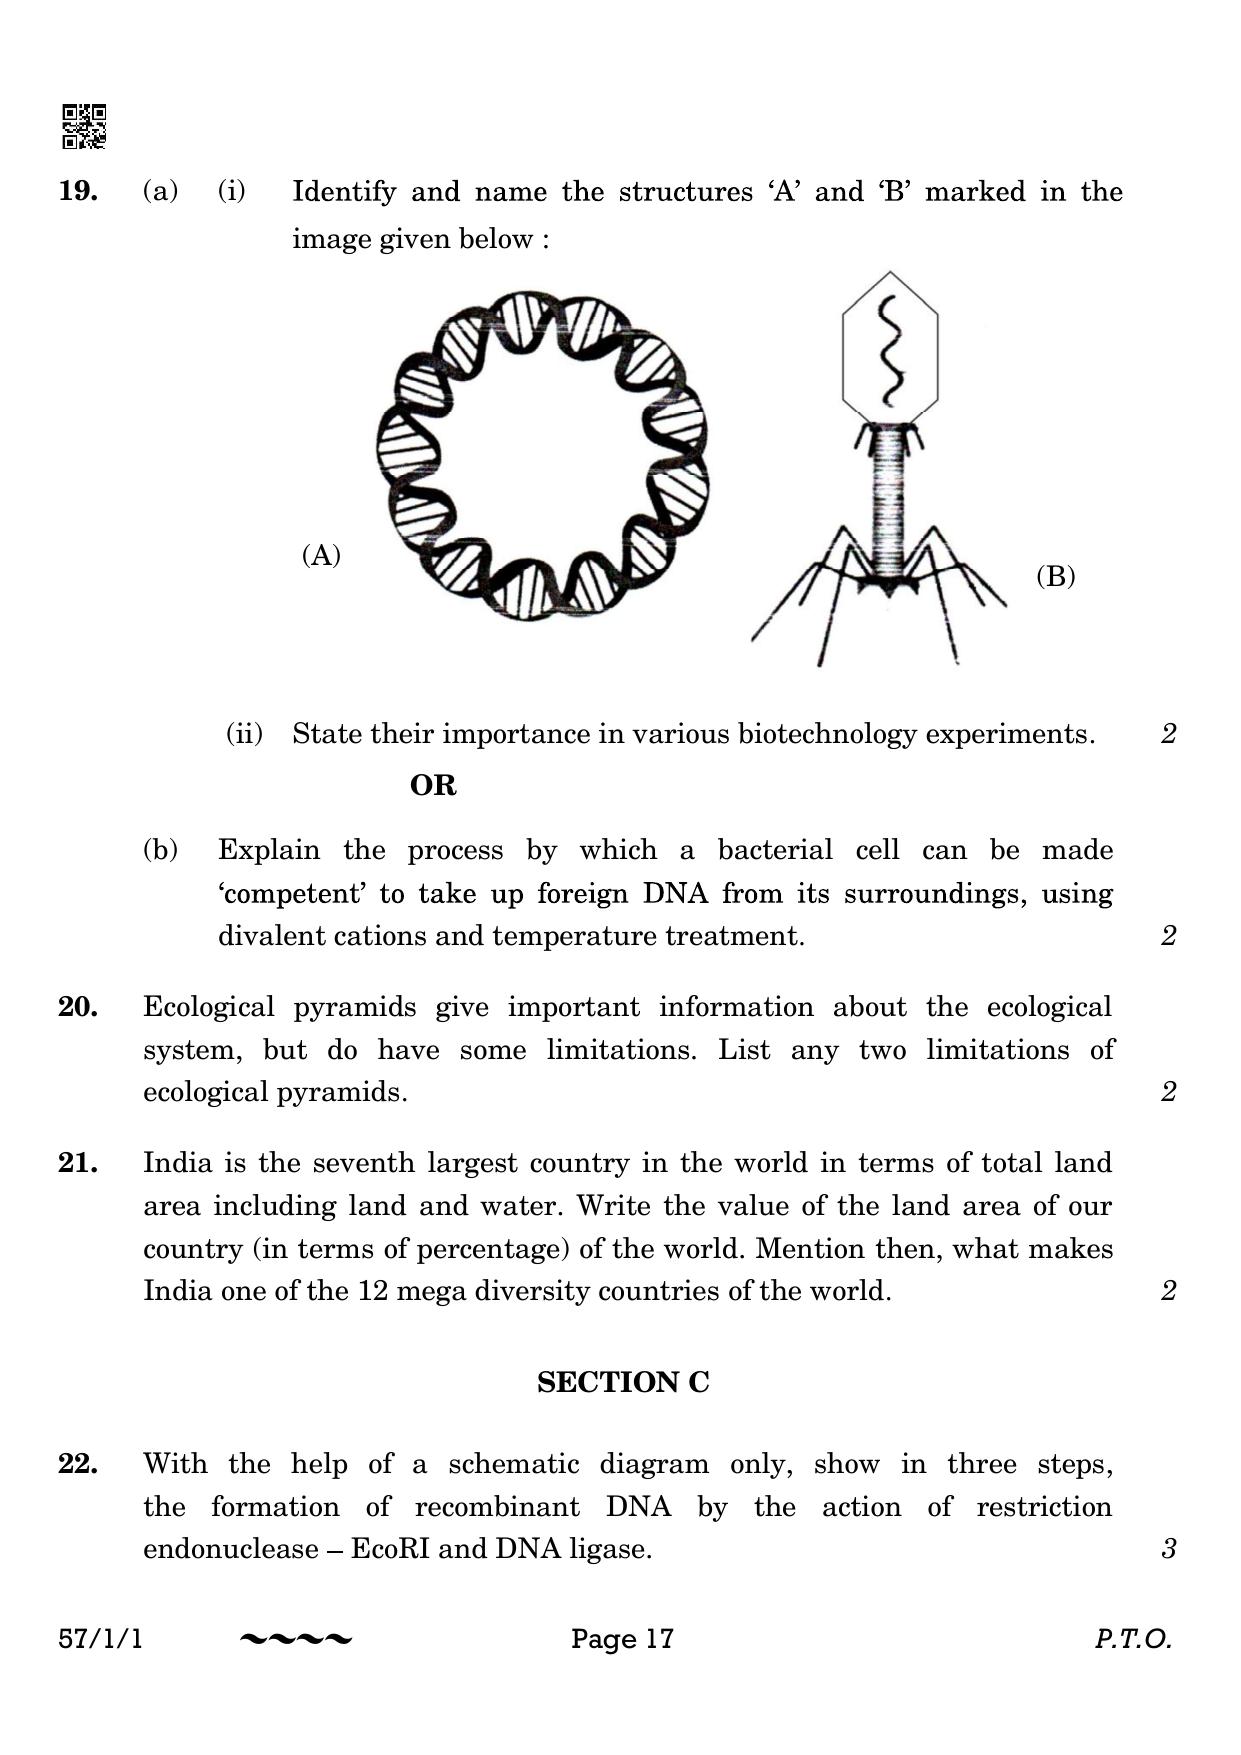 CBSE Class 12 57-1-1 Biology 2023 Question Paper - Page 17